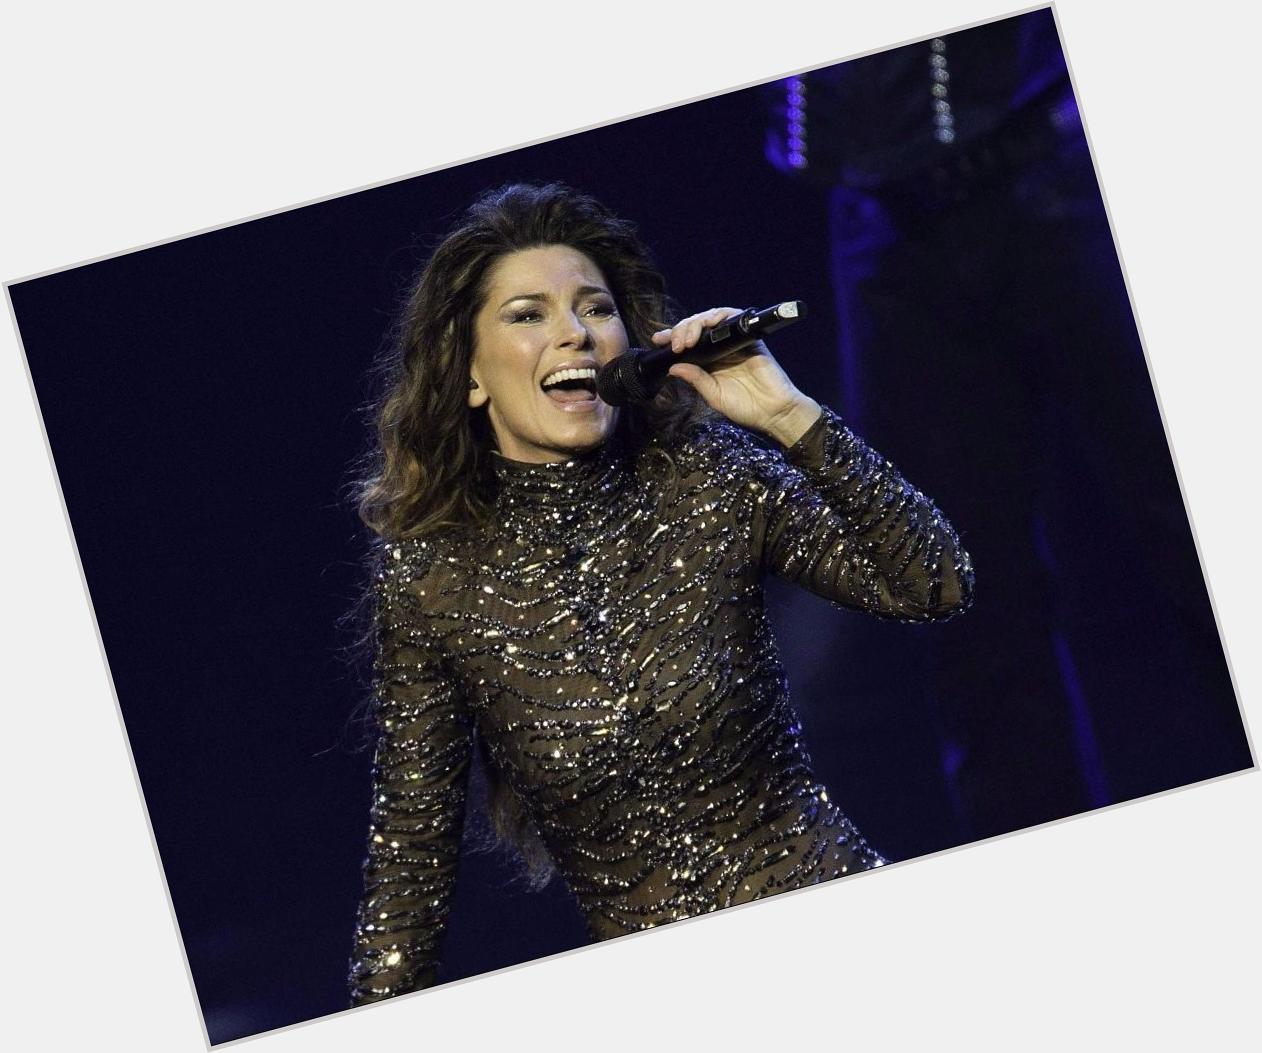 Happy birthday to the amazing Shania Twain!

I hope you have a wonderful day surrounded by friends and family! 